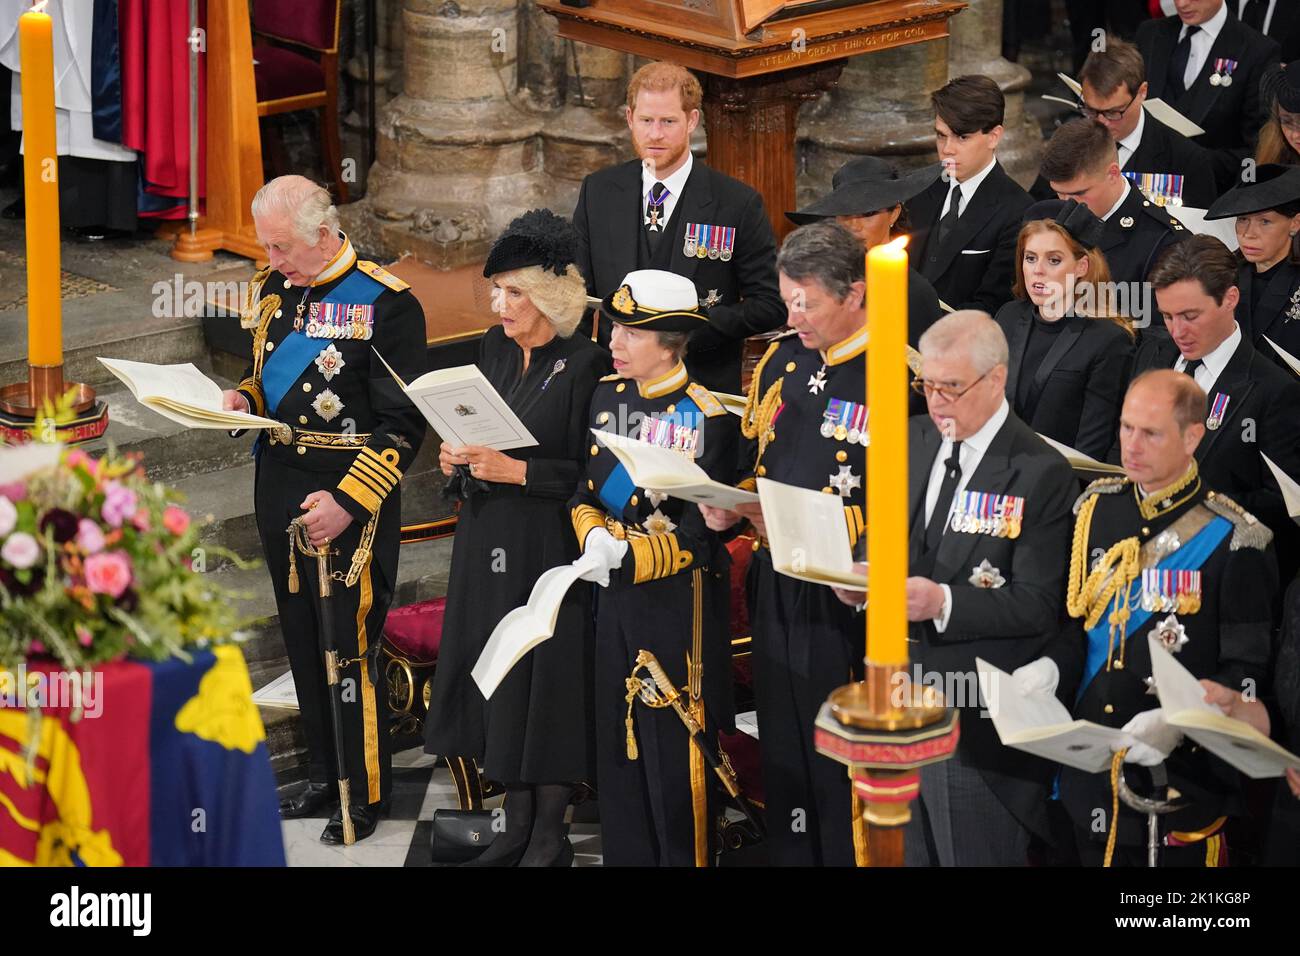 (front row) King Charles III, the Queen Consort, the Princess Royal, Vice Admiral Sir Tim Laurence, the Duke of York, the Earl of Wessex, (second row) the Duke of Sussex, the Duchess of Sussex, Princess Beatrice, Edoardo Mapelli Mozzi and (third row) Samuel Chatto, Arthur Chatto, Lady Sarah Chatto, in front of the coffin of Queen Elizabeth II during her State Funeral at the Abbey in London. Picture date: Monday September 19, 2022. Stock Photo